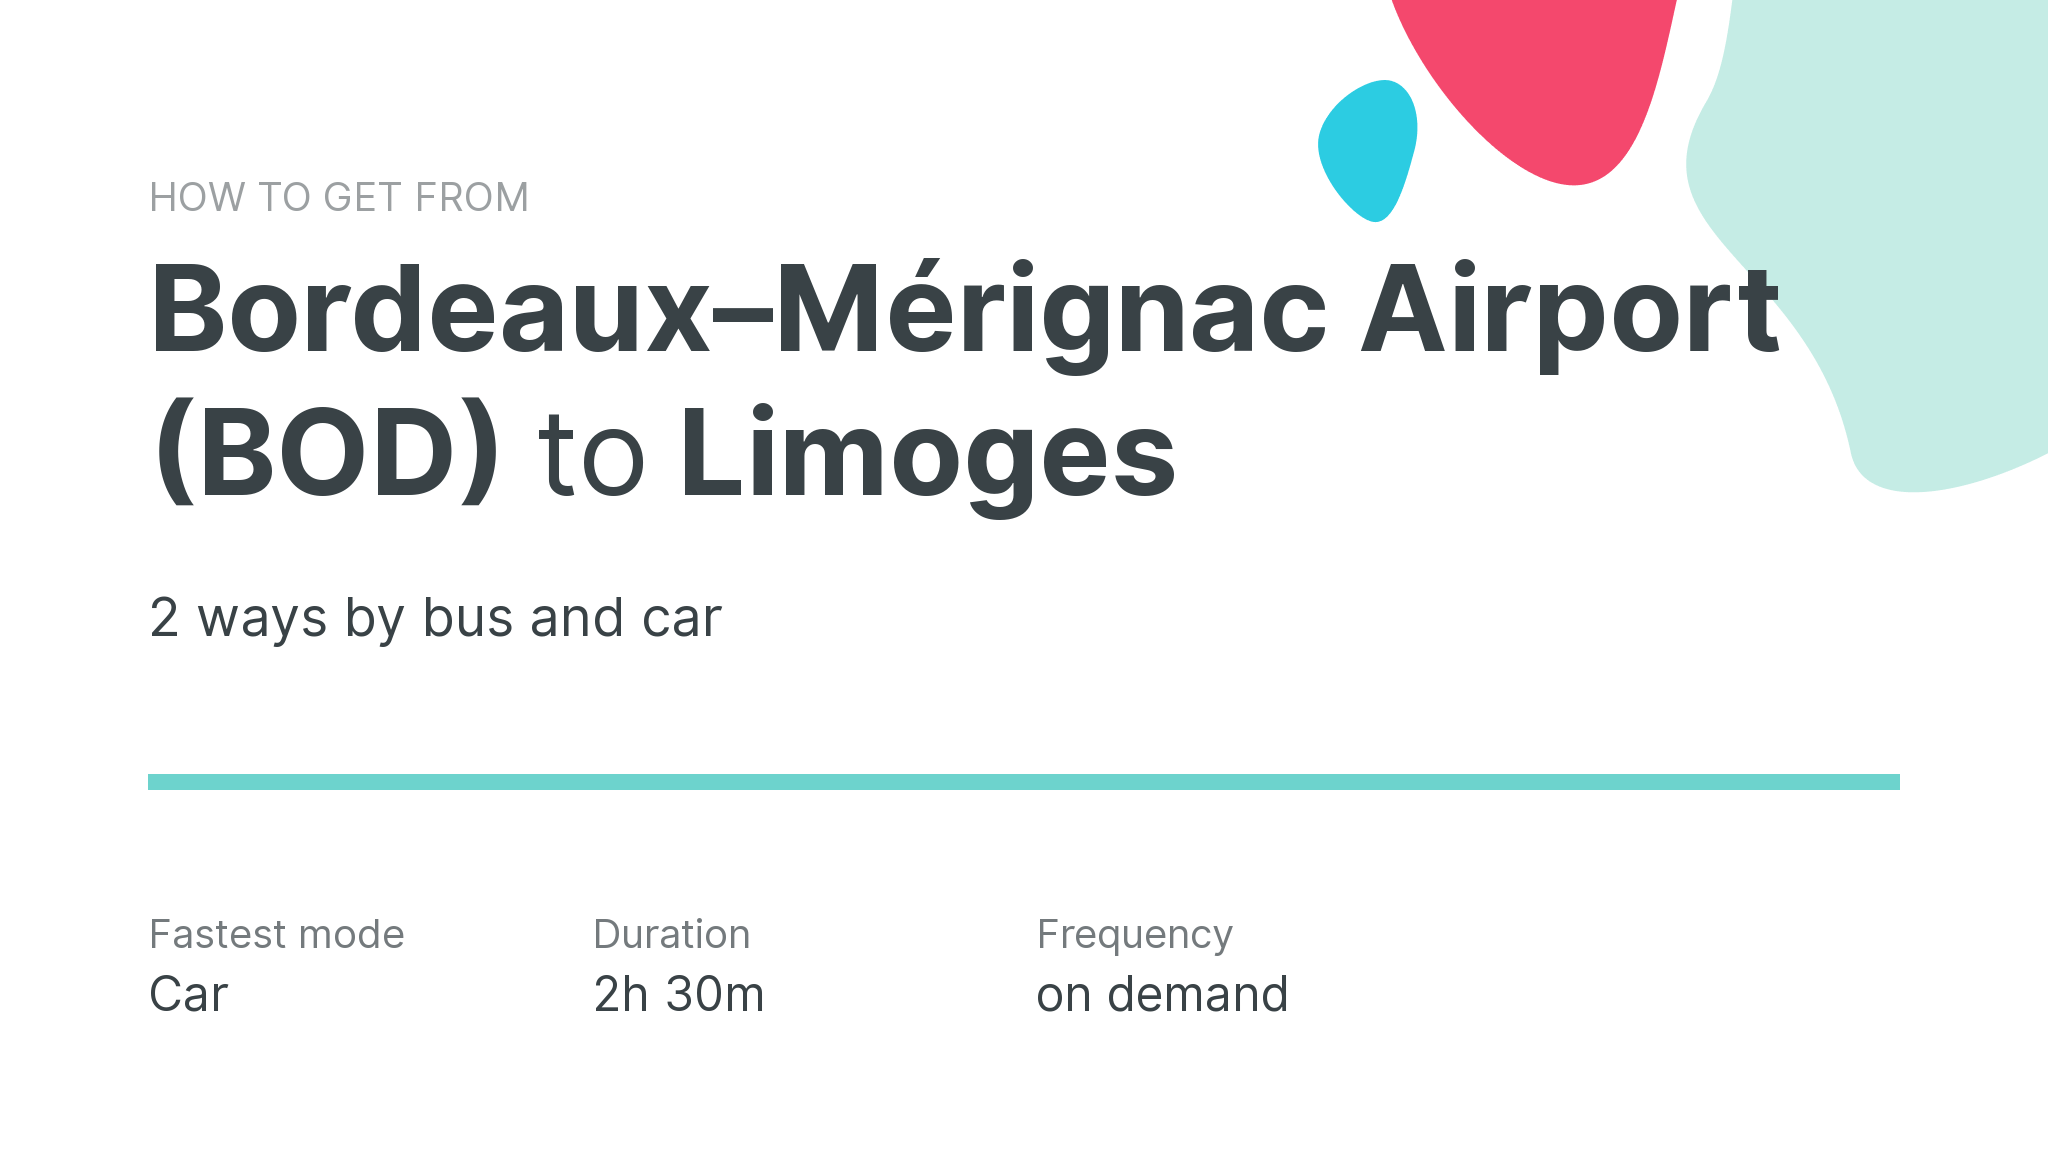 How do I get from Bordeaux–Mérignac Airport (BOD) to Limoges